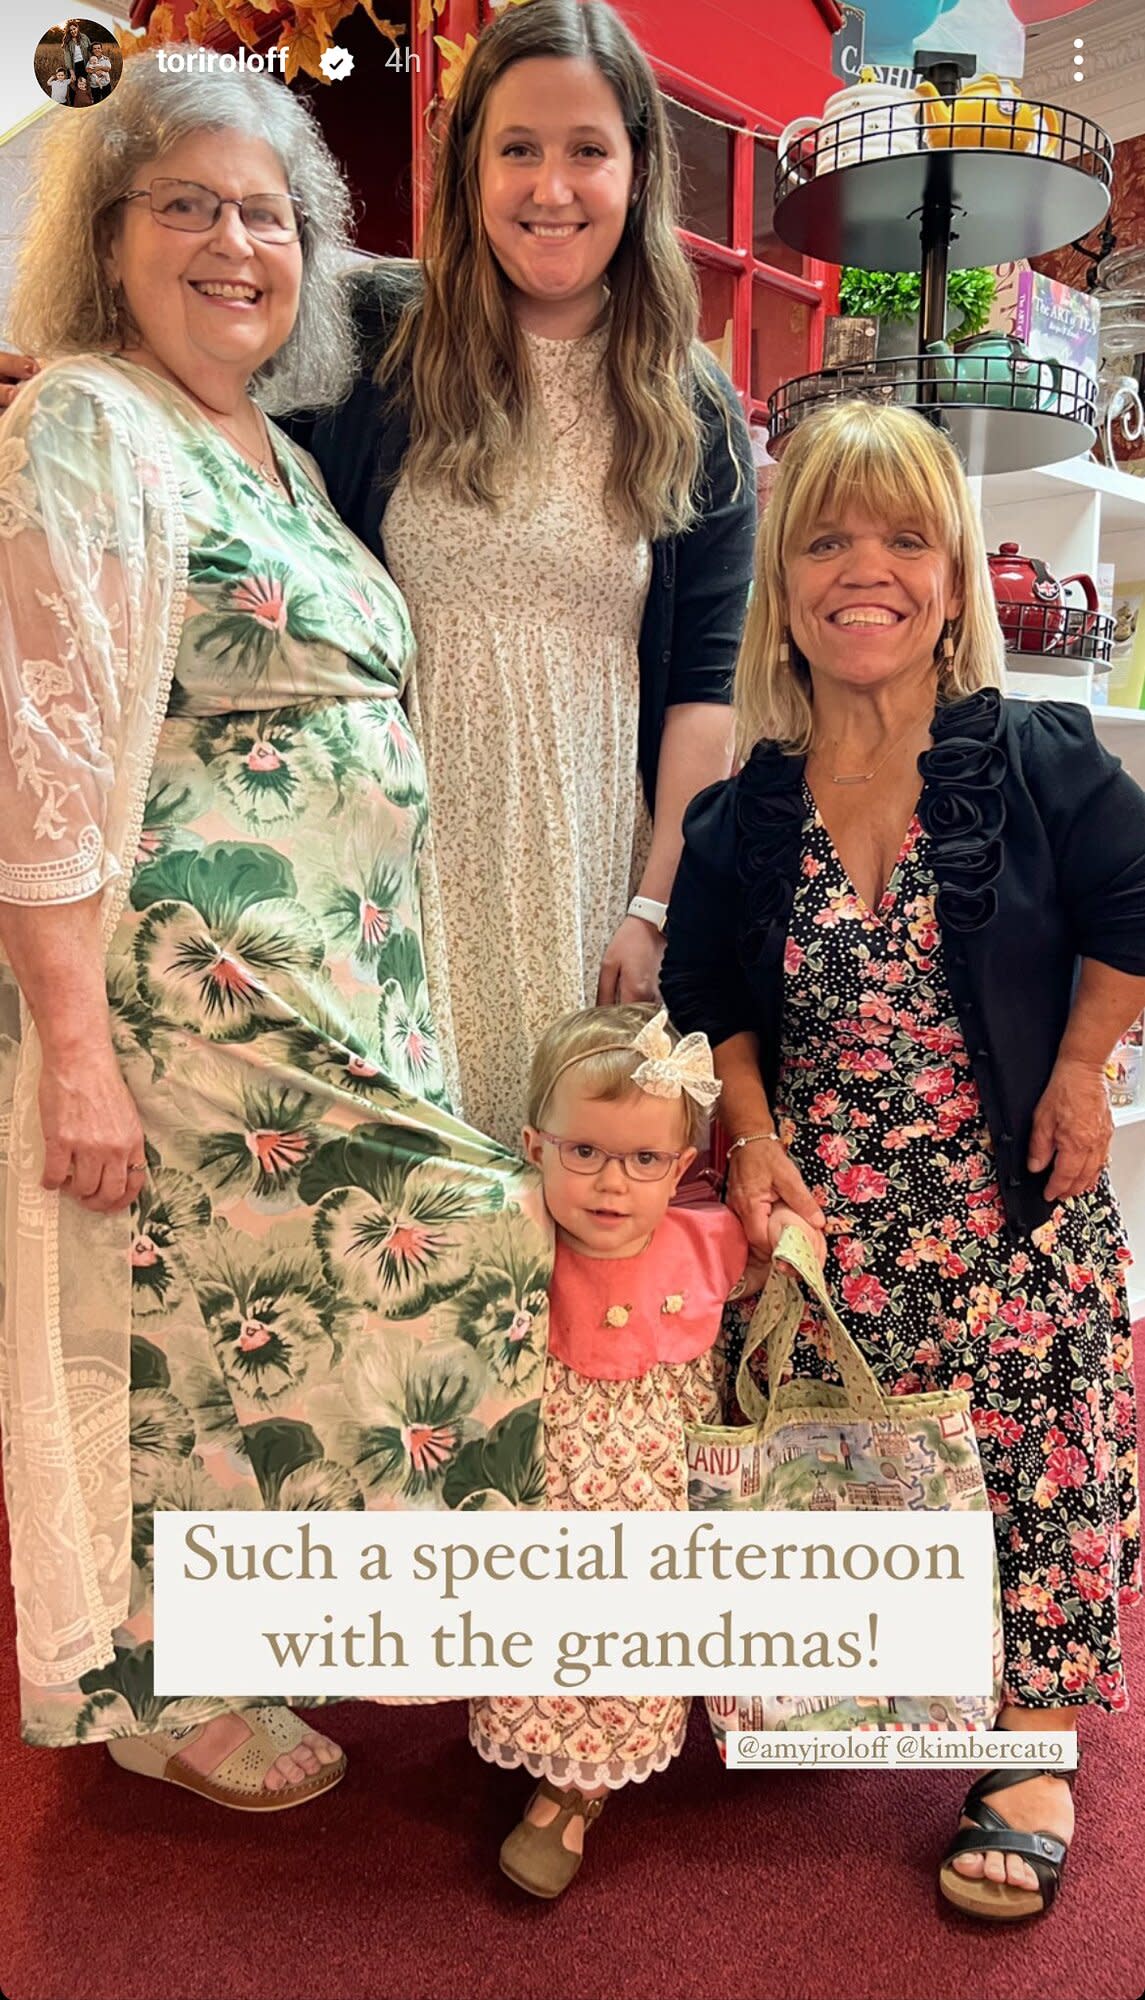 Tori Roloff Treats Daughter Lilah to Her First Tea Party with Both Grandmas